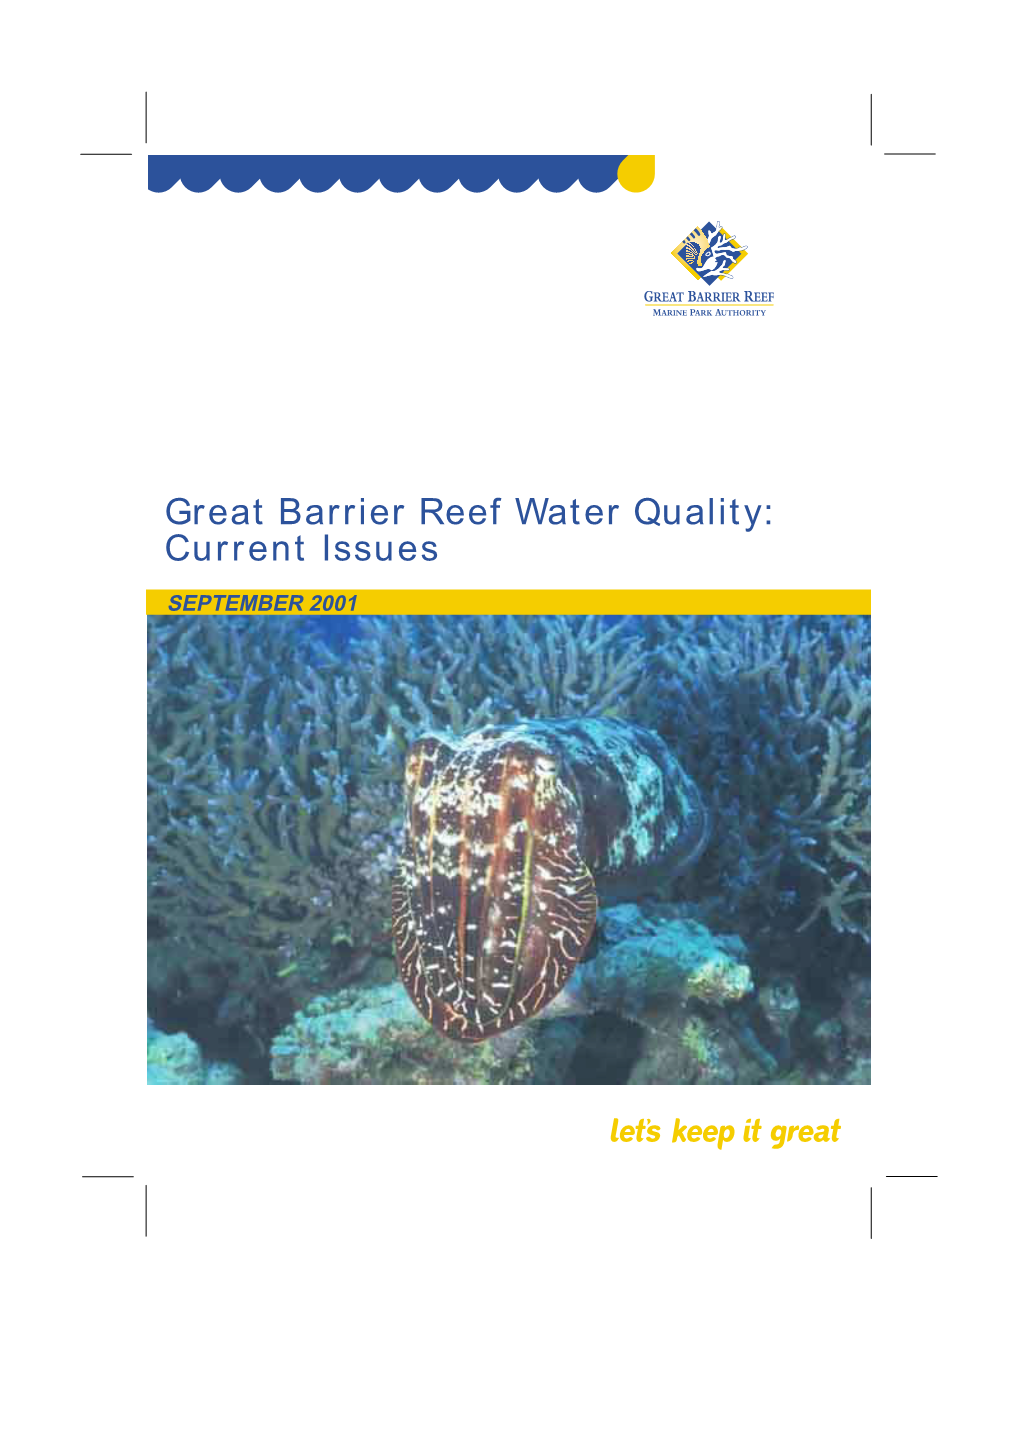 Great Barrier Reef Water Quality: Current Issues